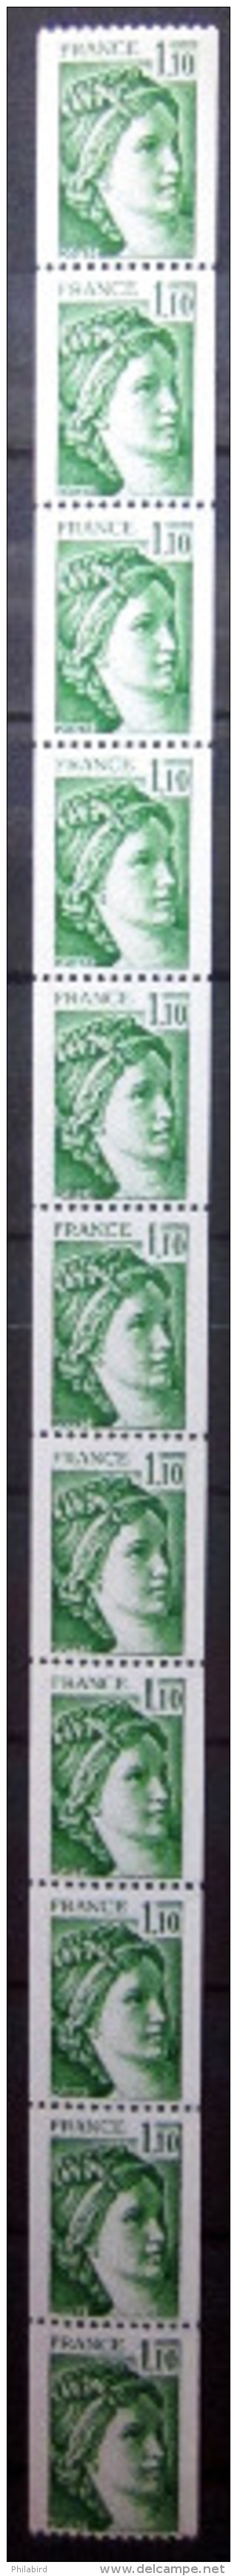 FRANCE            ROULETTE  73  (11 Timbres)            NEUF** - Coil Stamps